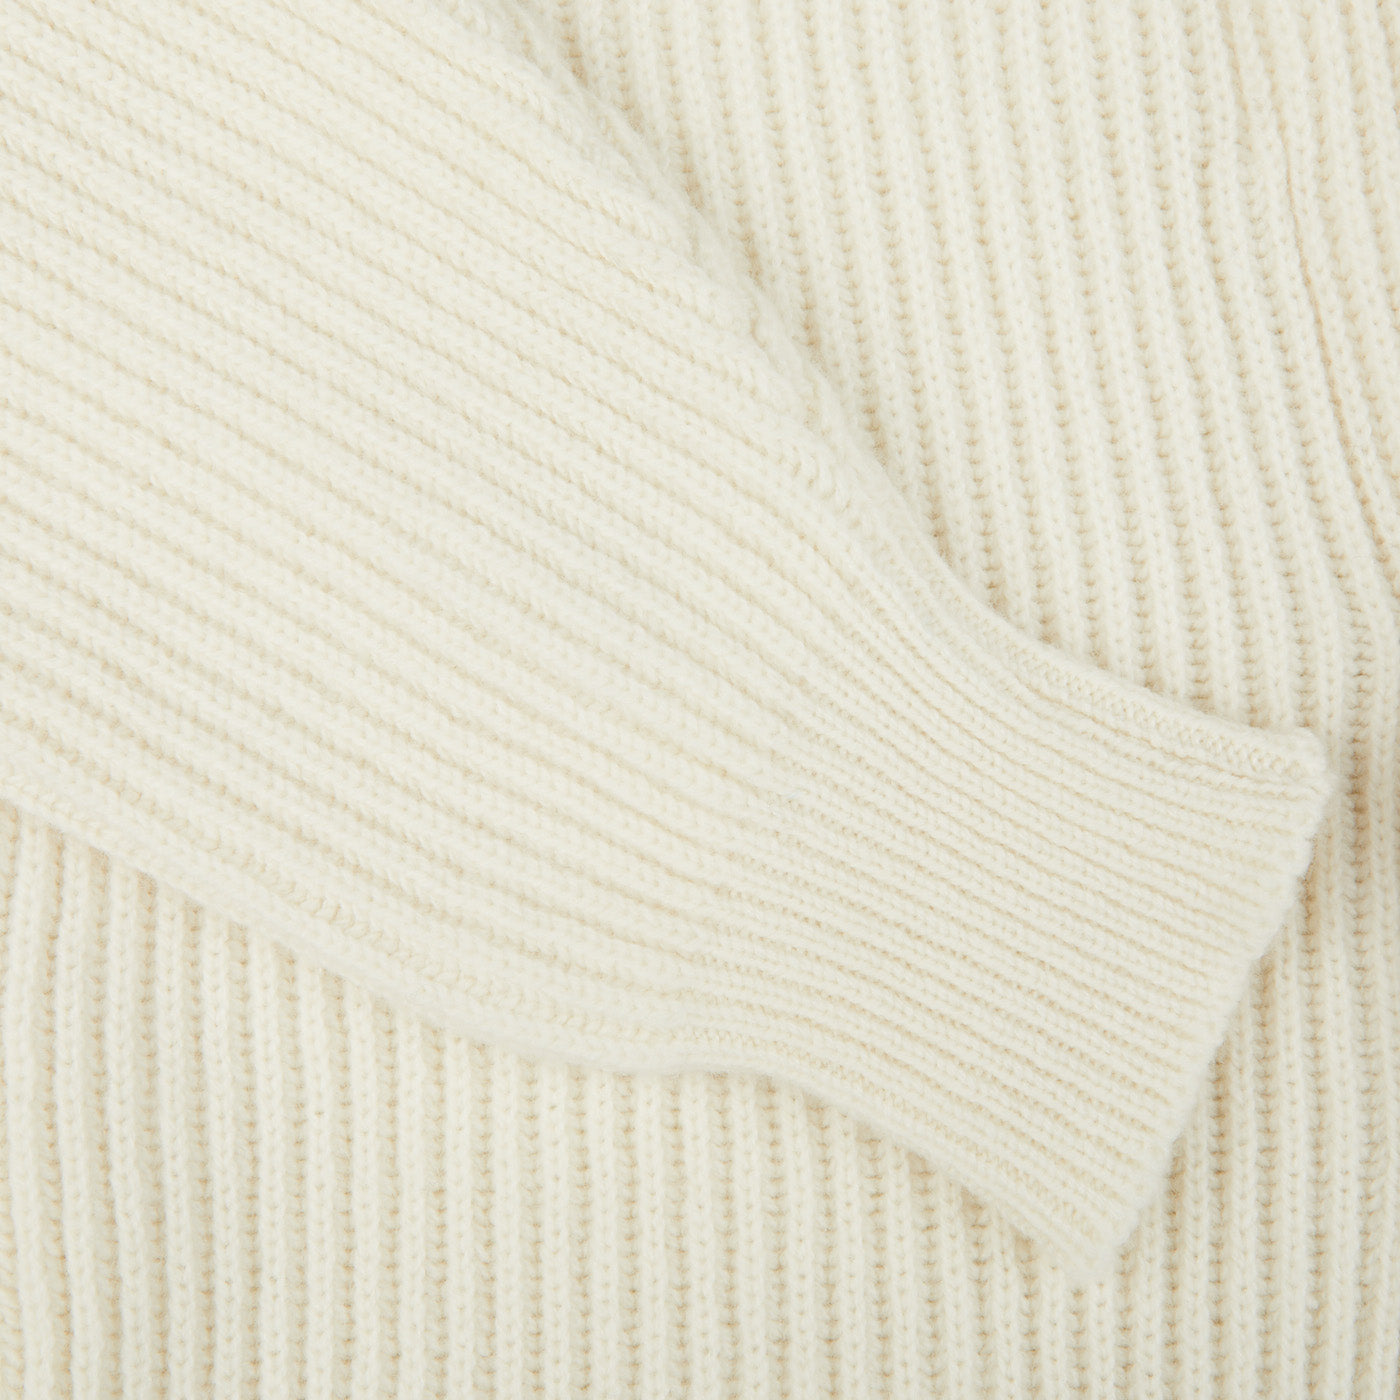 A close up of an Ecru Beige Lambswool Shawl Collar Cardigan made with Scottish lambswool, by William Lockie.